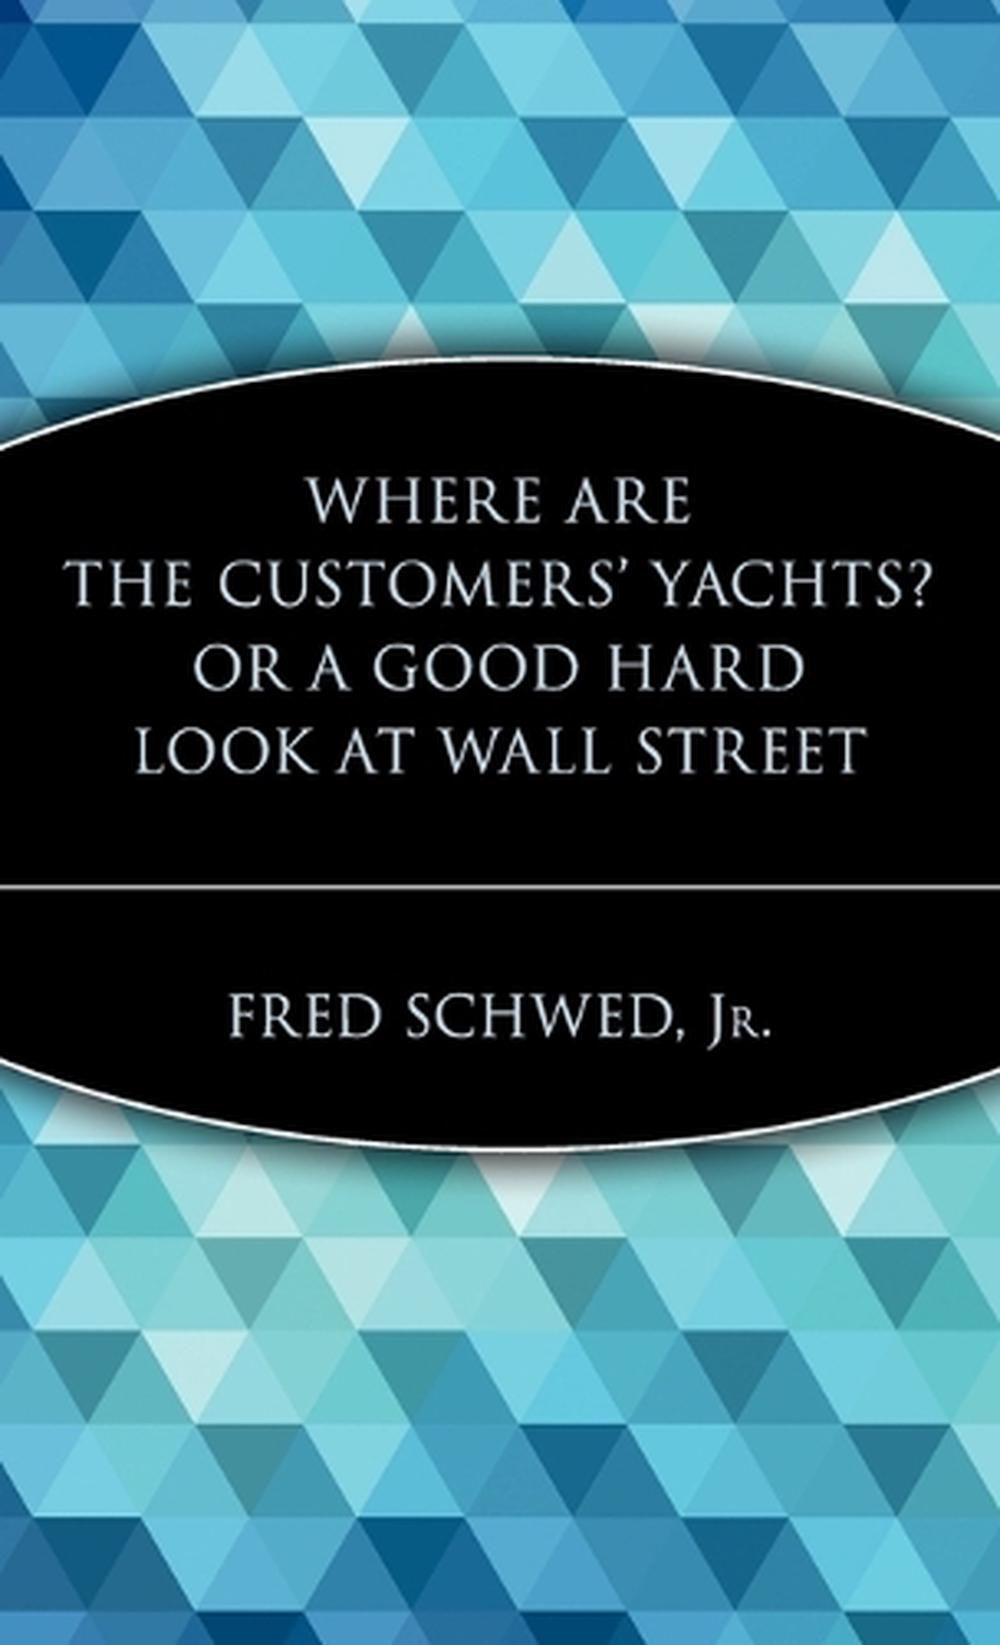 Where Are the Customers' Yachts? or a Good Hard Look at Wall Street by